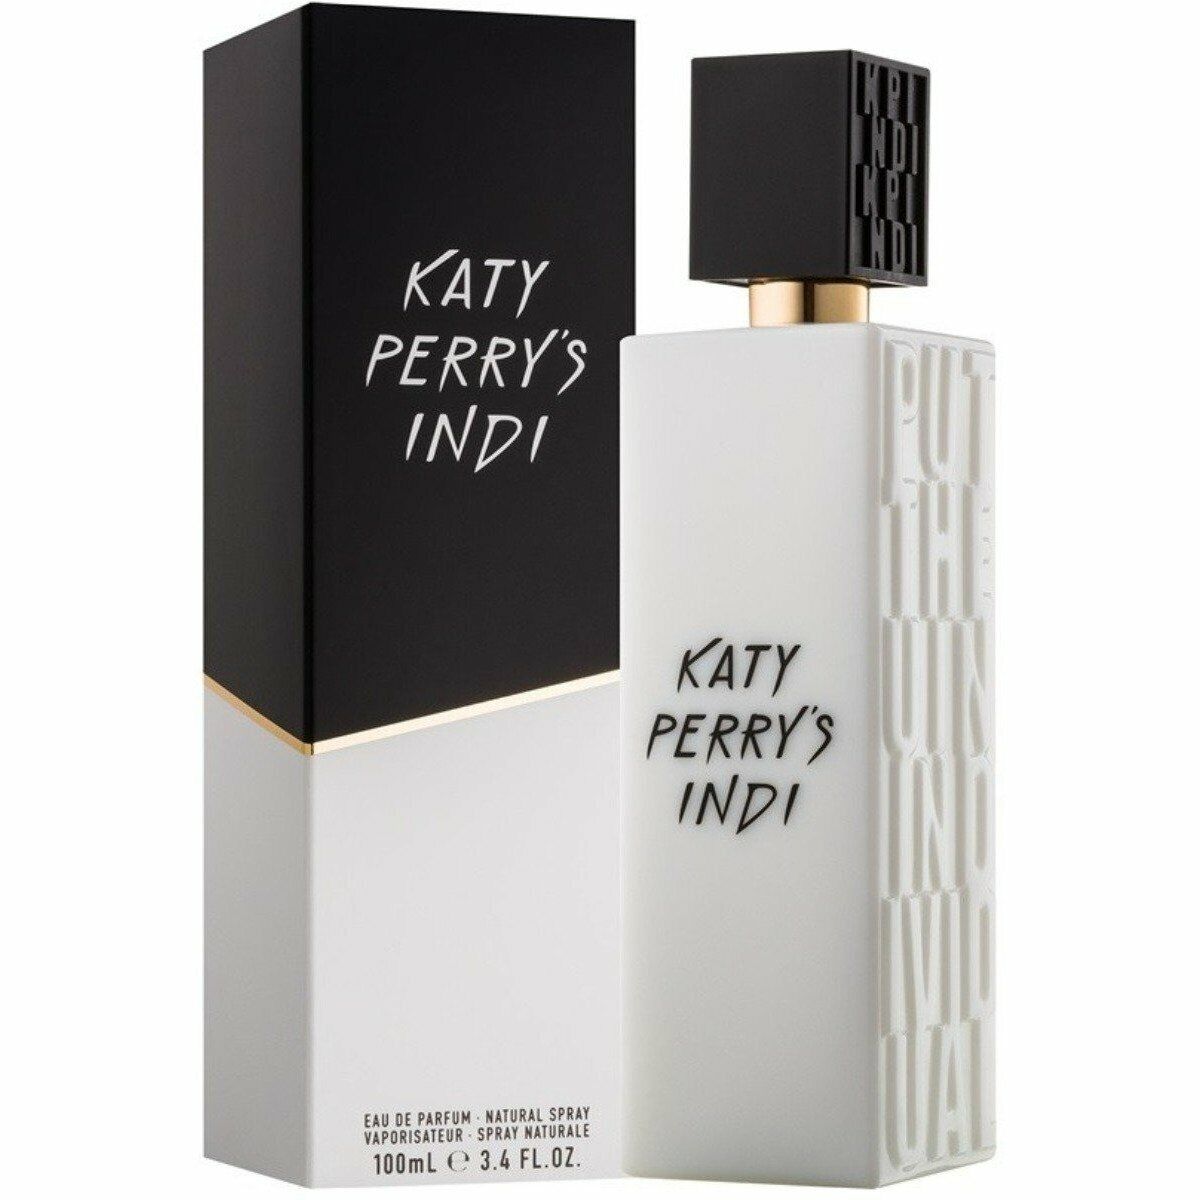 INDI by Katy Perry perfume for her EDP 3.3 / 3.4 oz New in Box Se... - ebay.com/itm/3926634602… #perry #katycats #music #swishswish